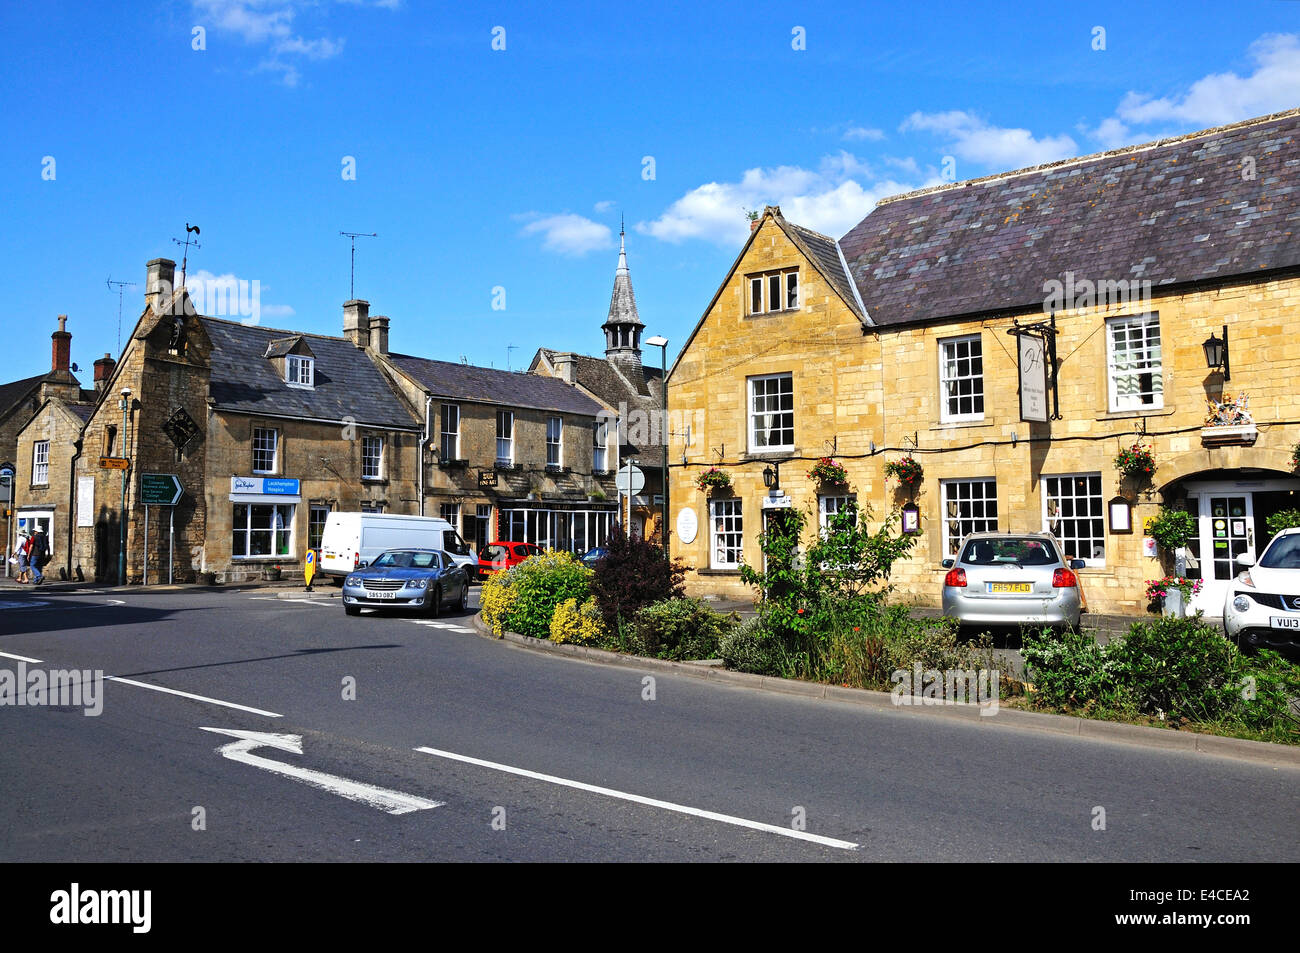 The White Hart Royal Hotel on the corner of High Street and Oxford Street, Moreton-in-Marsh, England, UK, Western Europe. Stock Photo